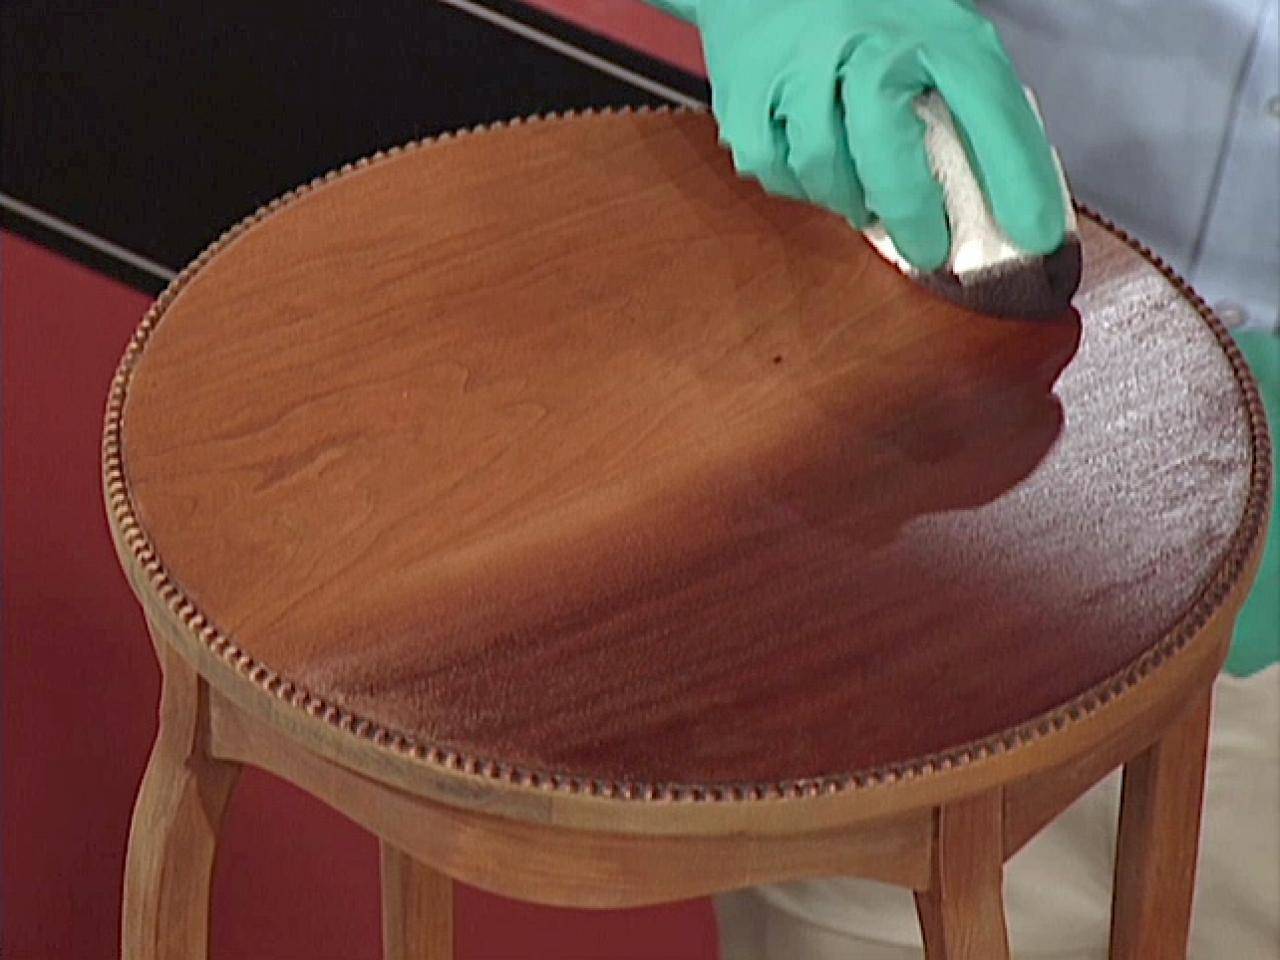 This is how you can remove stains from wooden furniture